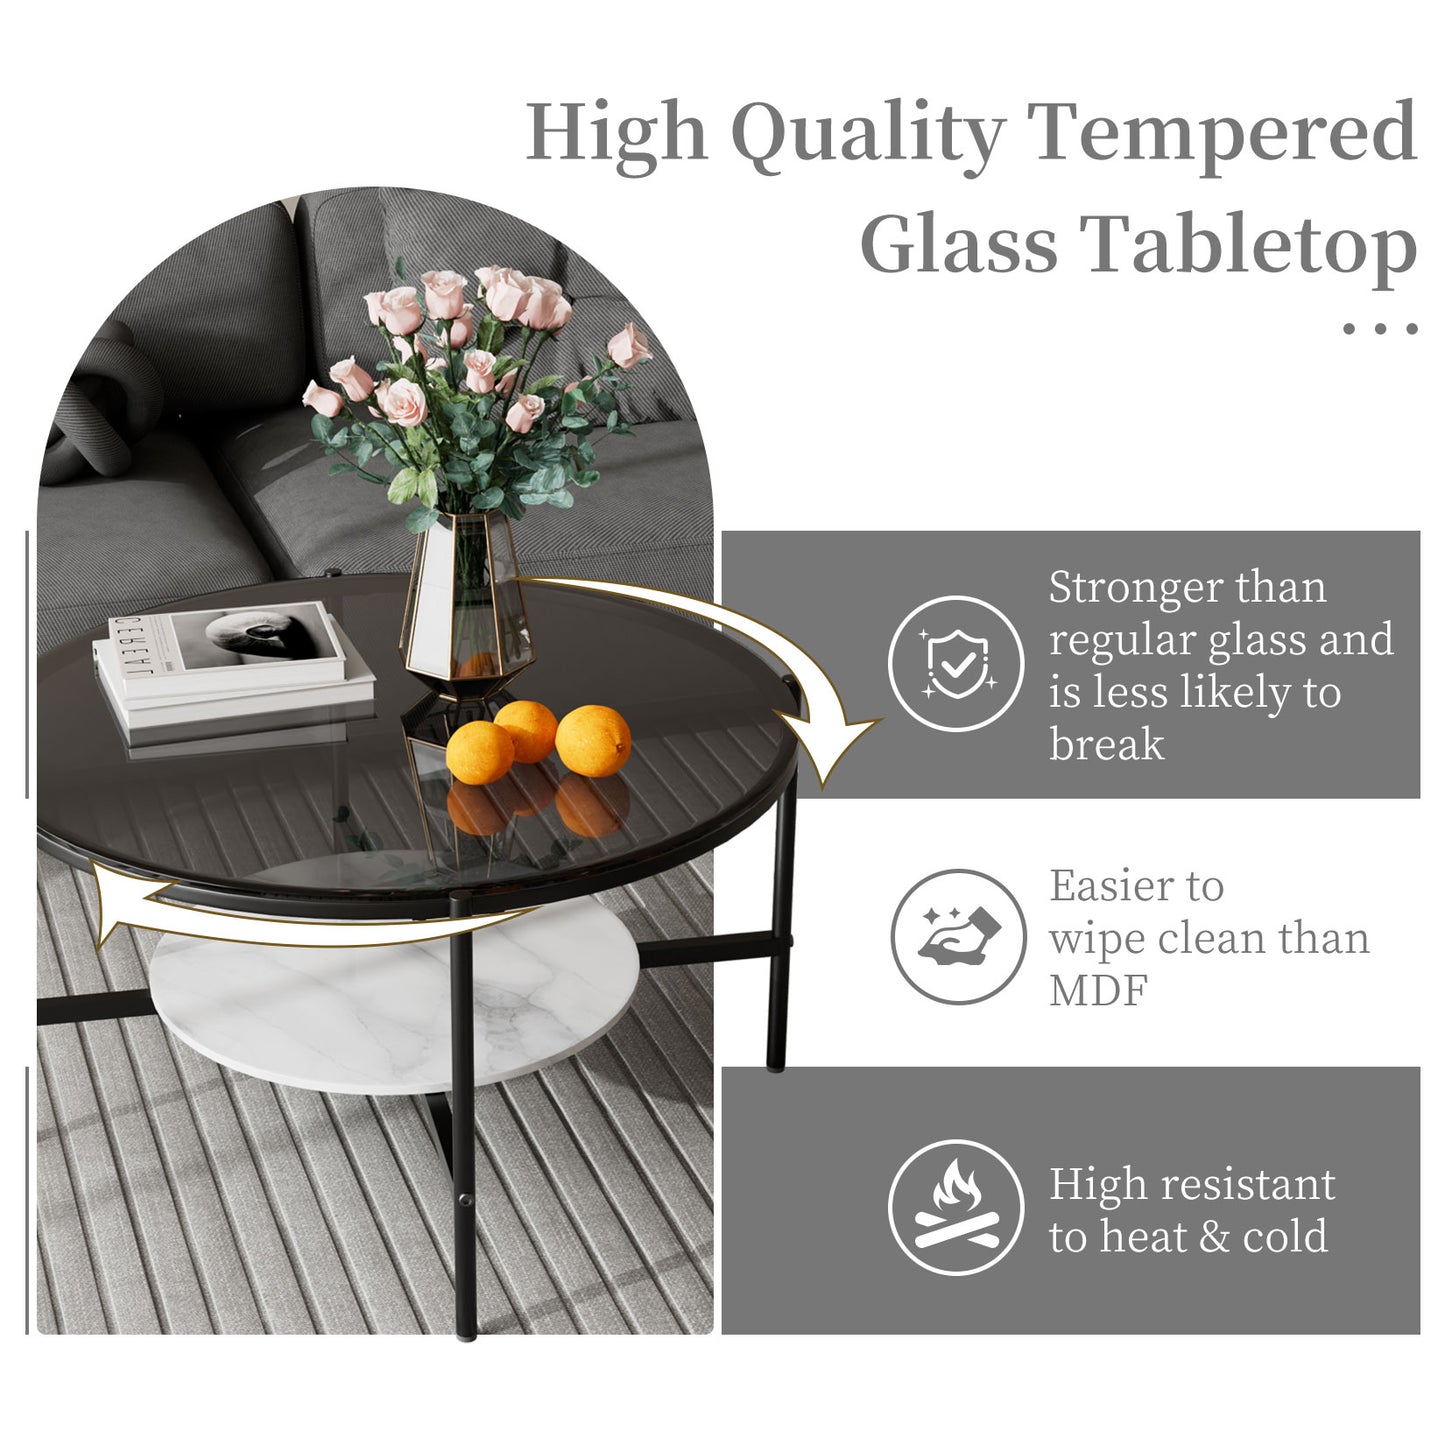 Tempered Glass Coffe Table -  Shatter-proof, Non-flammable